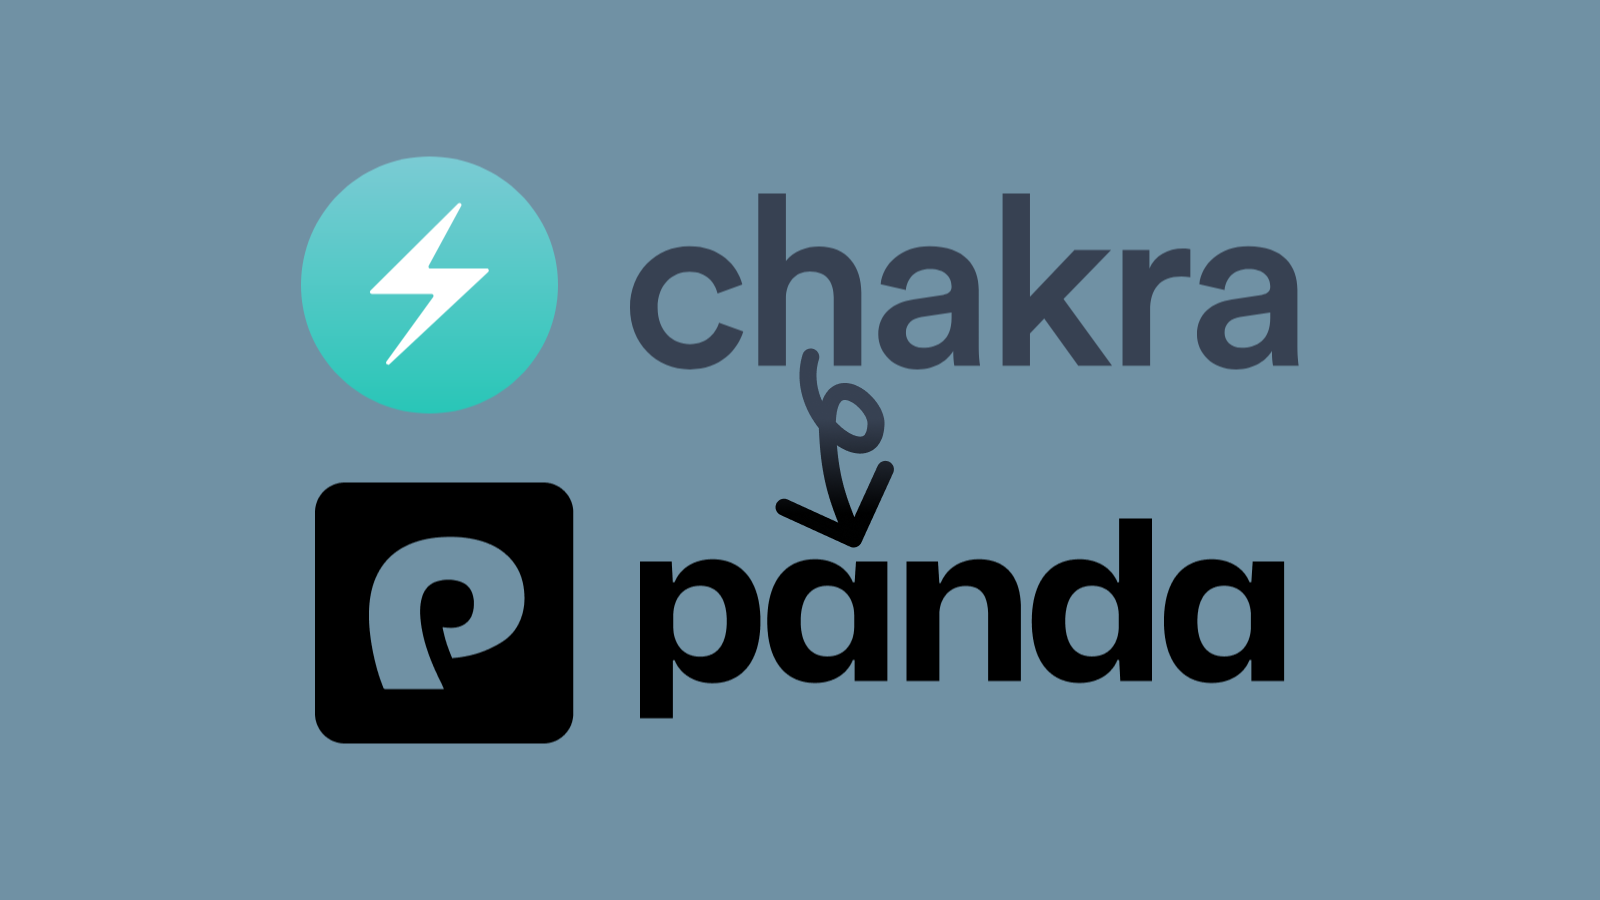 The Chakra UI logo with a curly arrow pointing to the Panda CSS logo